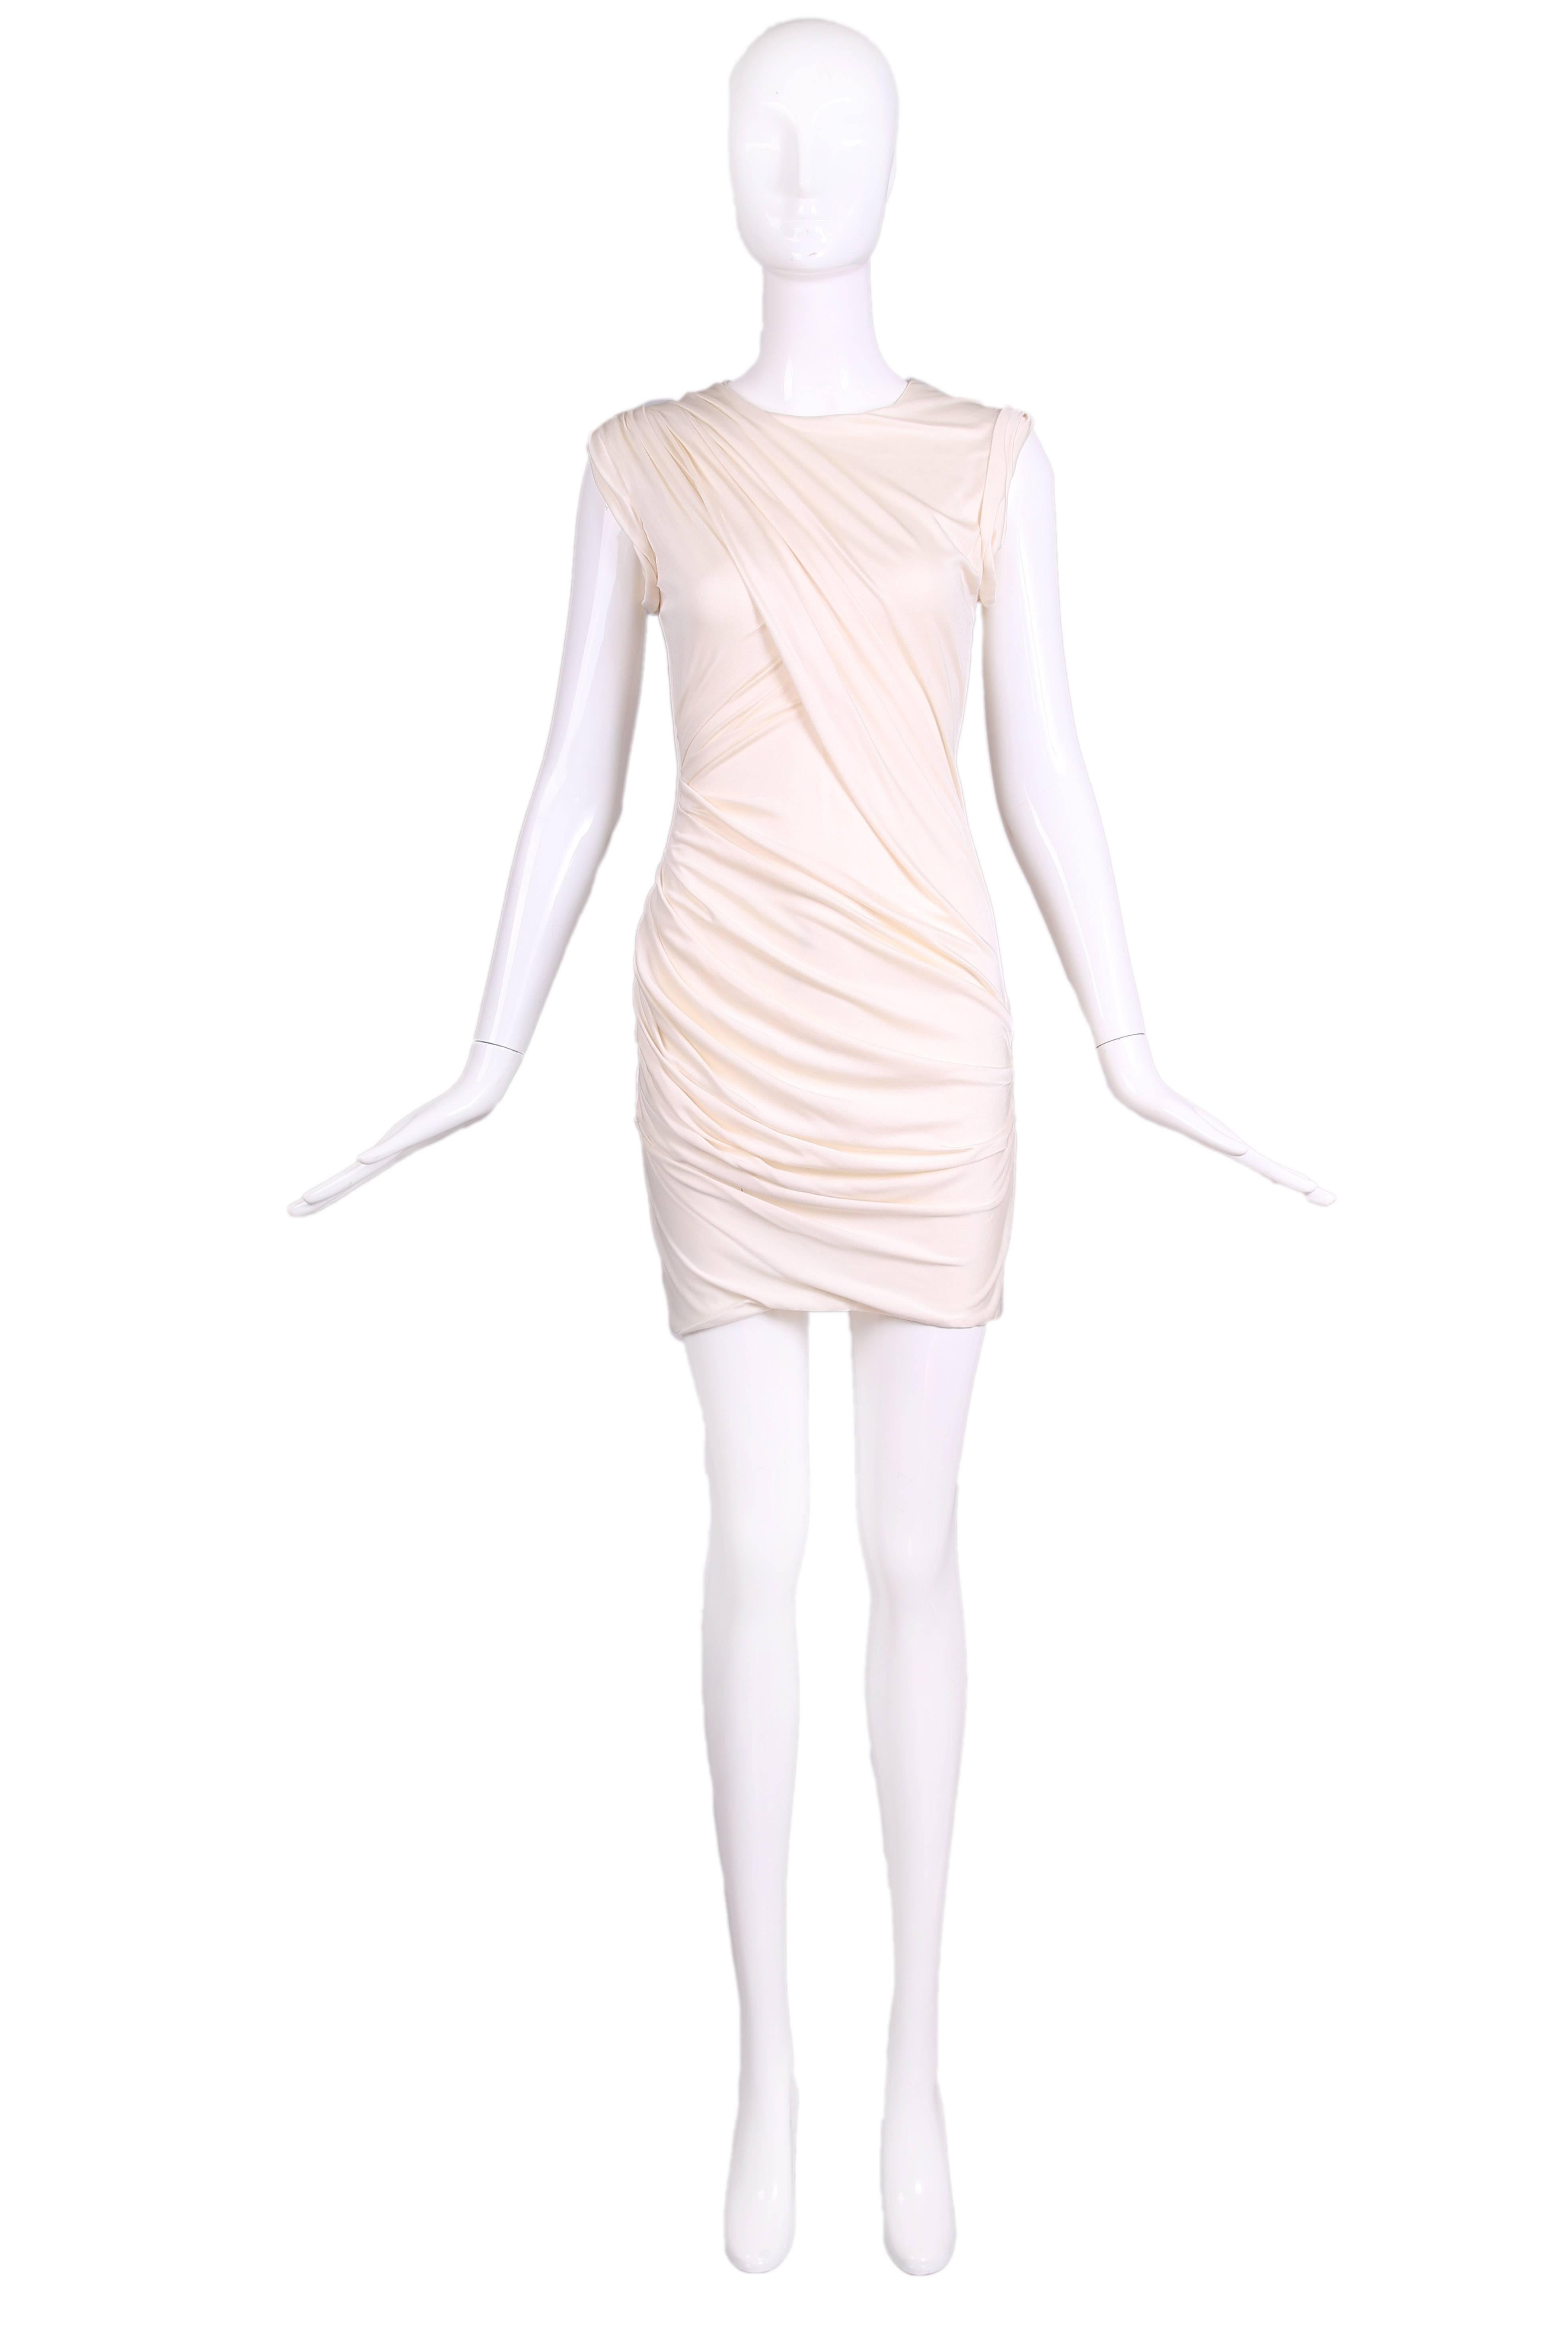 Alexander Wang creme-colored silk blend sleeveless mini dress with asymmetric ruching at front and back. Diagonal zipper closure at top of back bodice. Size 2. In excellent condition. 
MEASUREMENTS:
Bust - 32"
Waist - 26"
Hips -